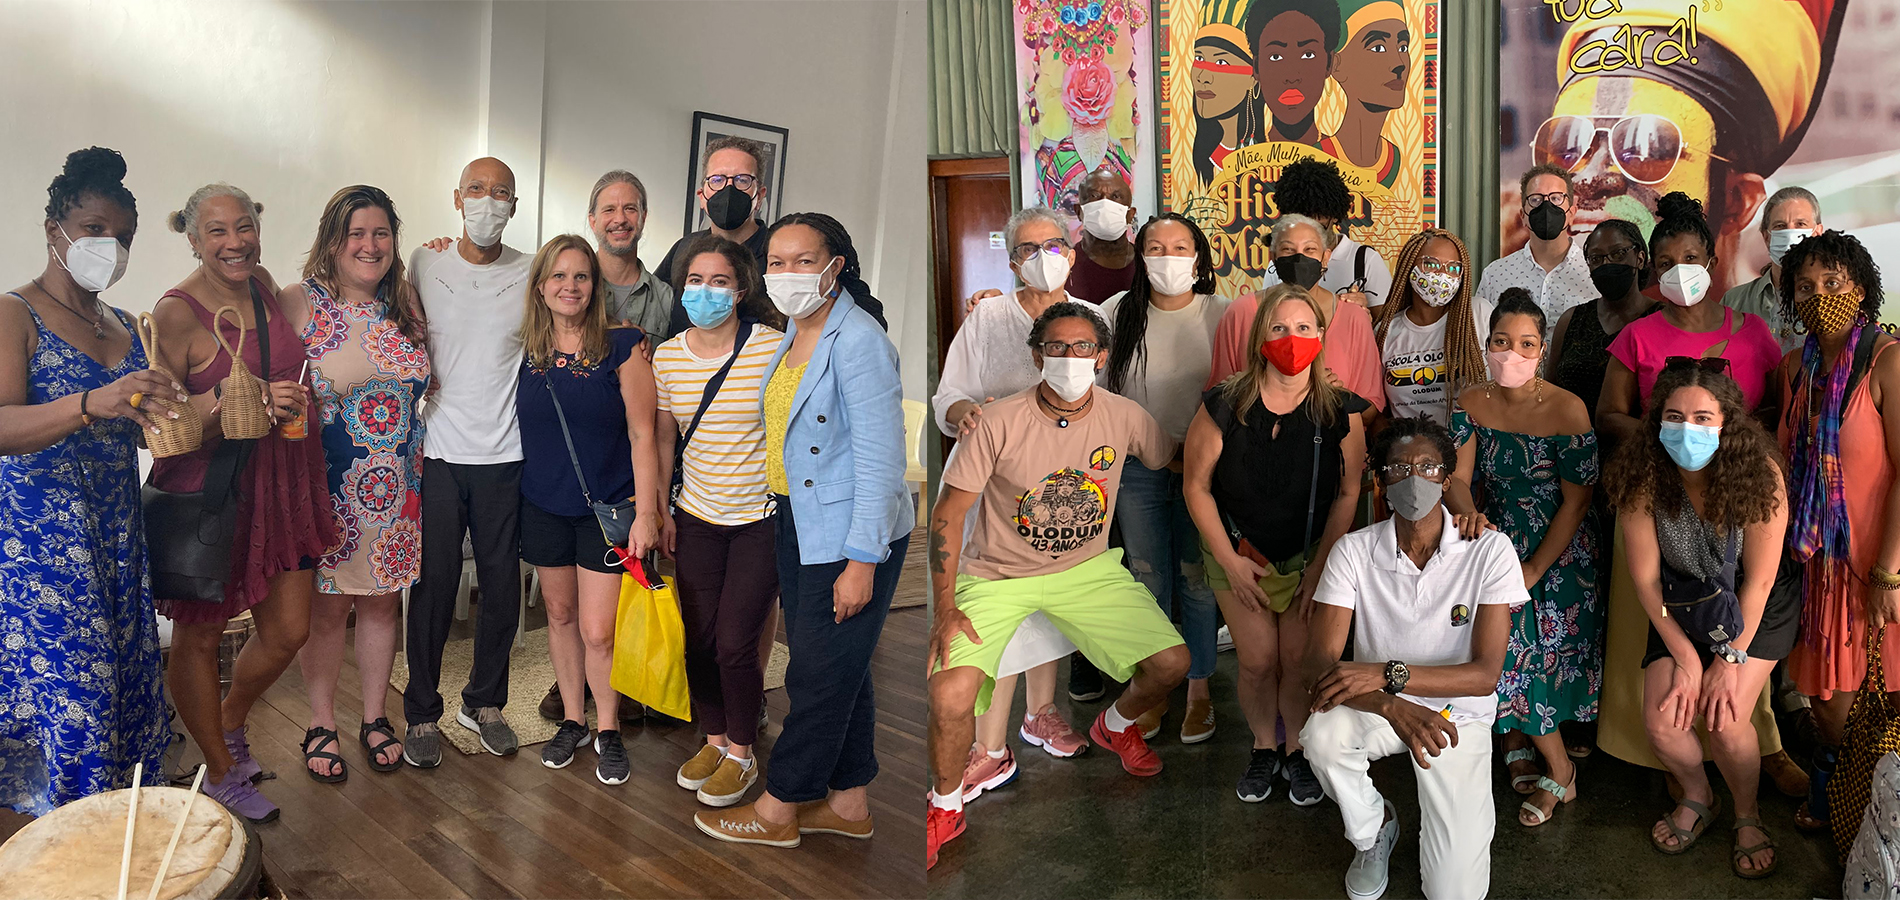 Two group photos, with nine people on the left indoors and 15 people on the right, many wearing masks.